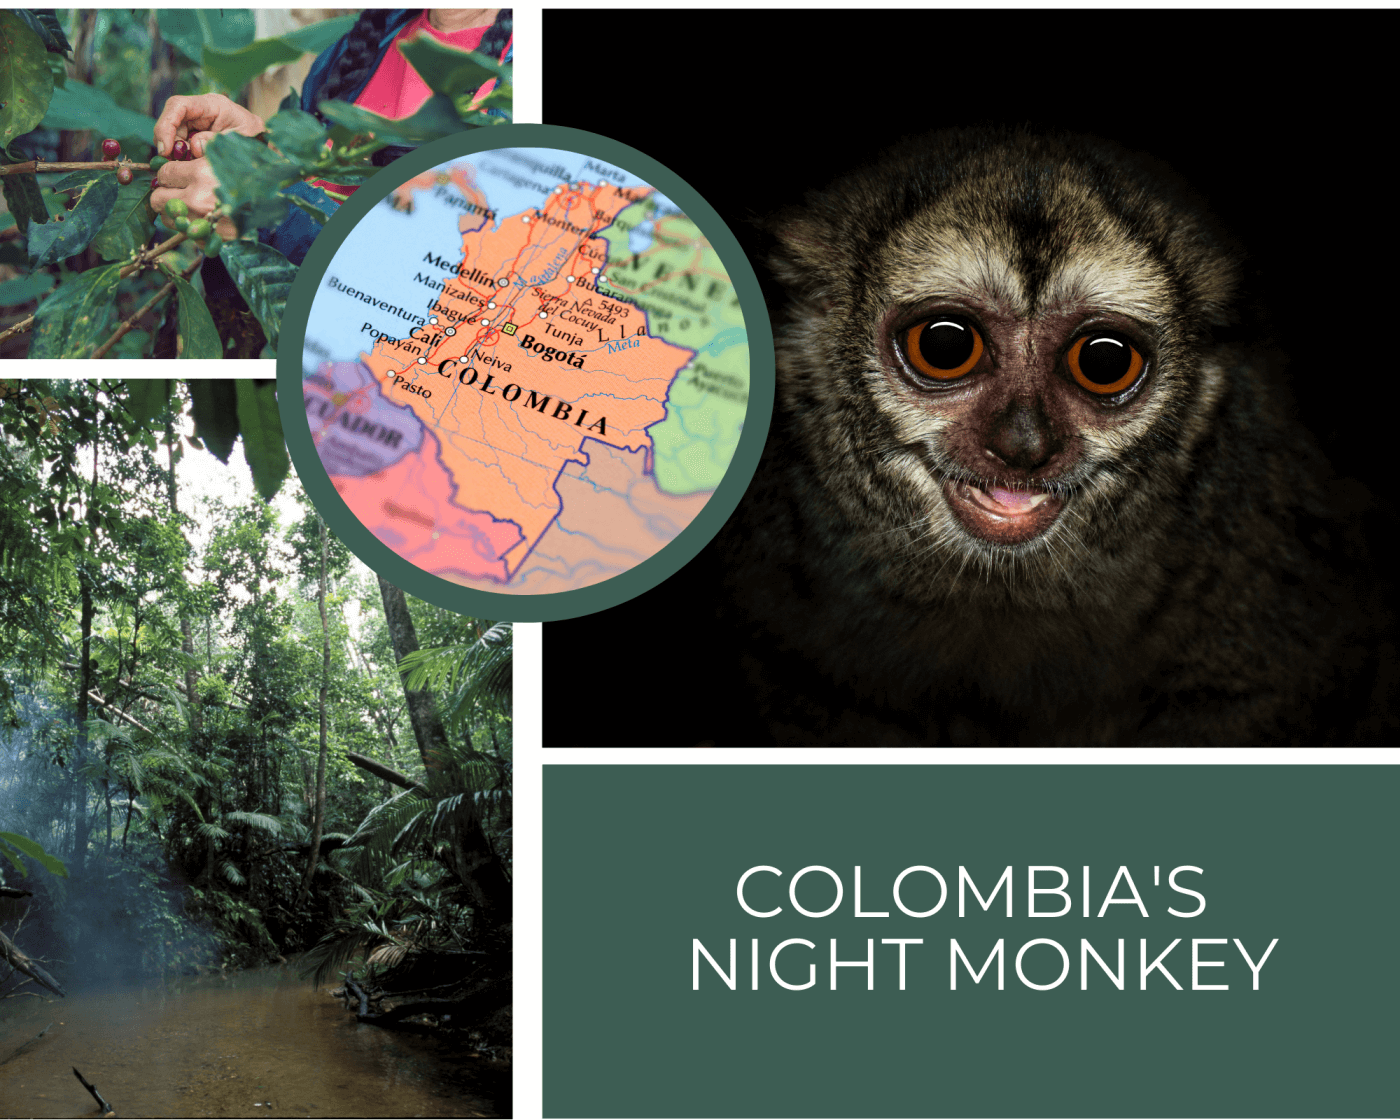 In the top left is someone picking a coffee plant. In the bottom left is a forest. in the top right is a night monkey, and in the bottom right it says Colombia's night monkey. In the center is Colombia on a map.